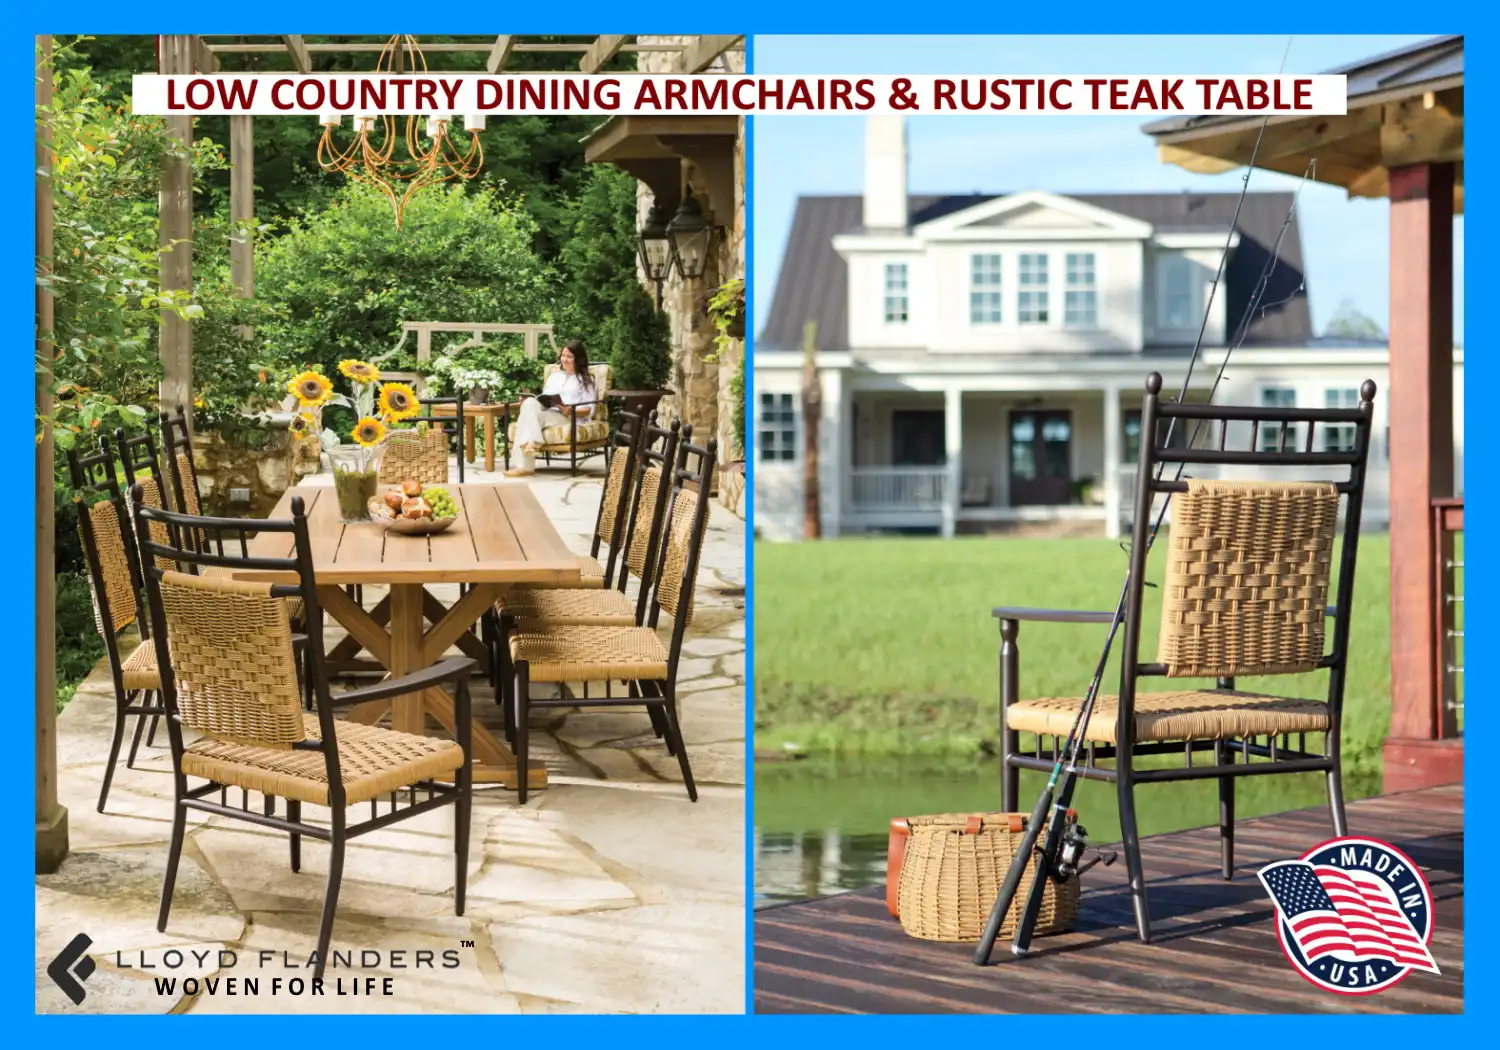 LOW COUNTRY DINING CHAIRS & RUSTIC TEAK TABLE